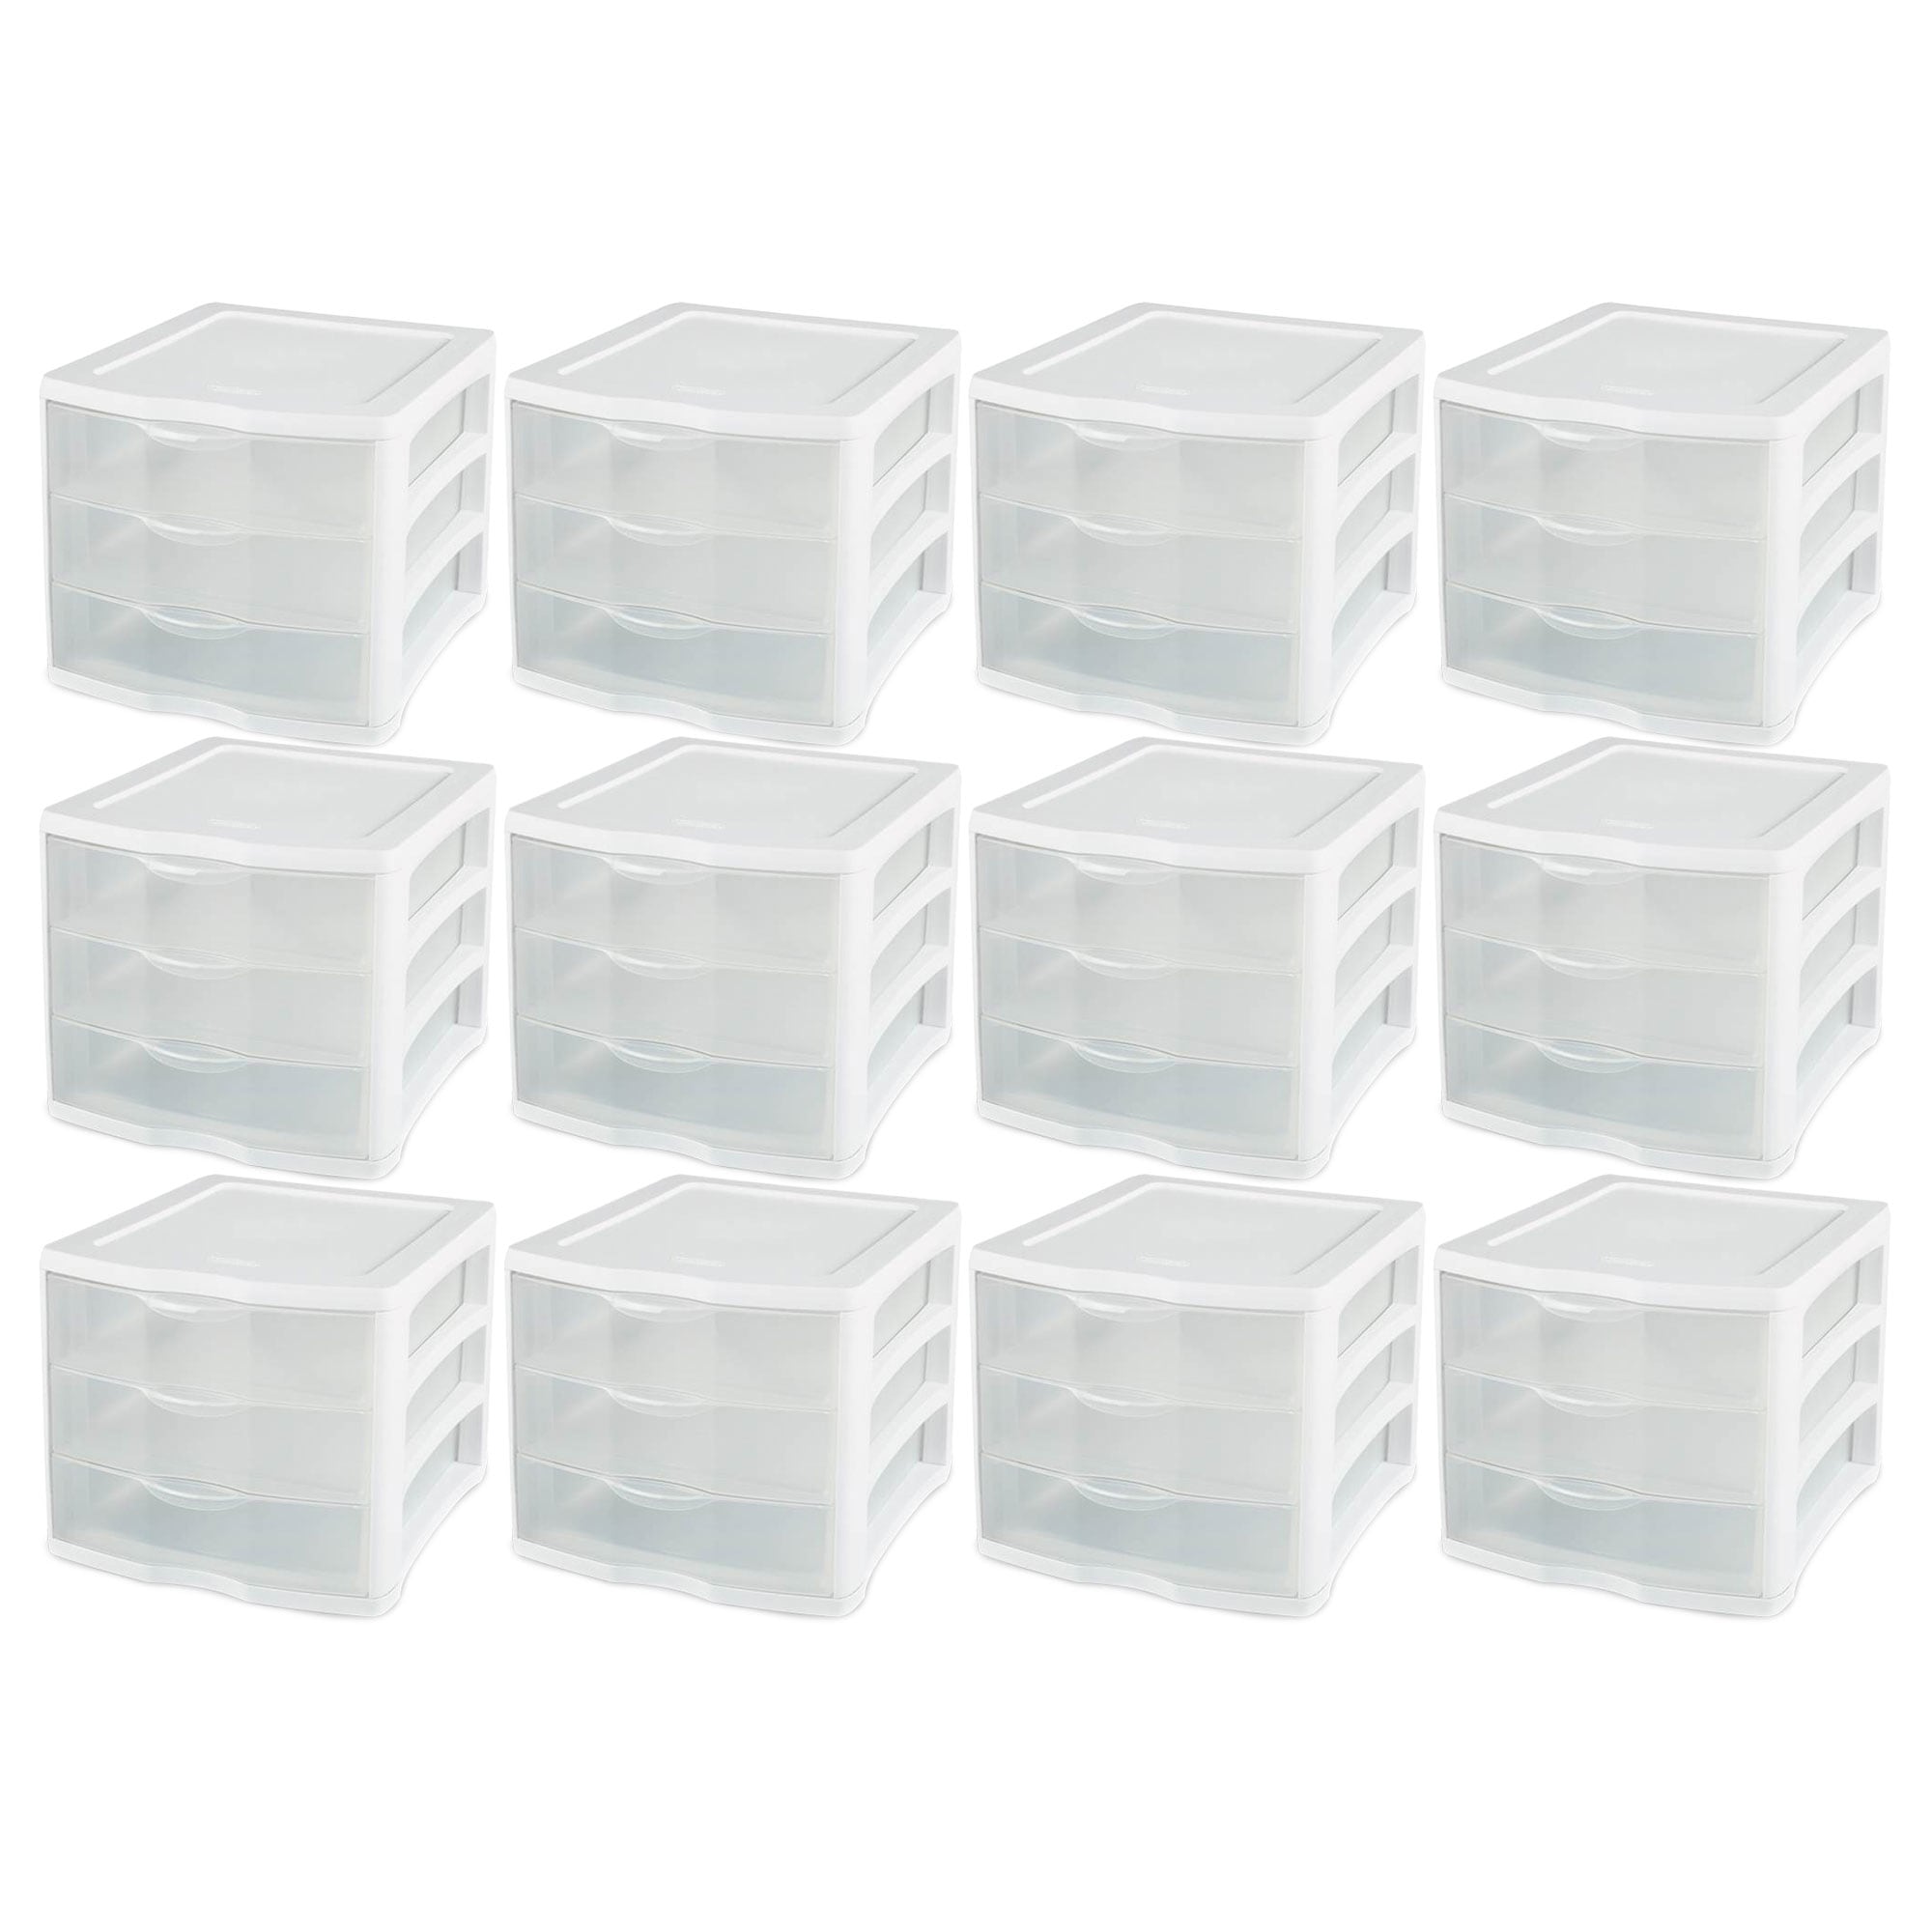 Sterilite 12-Pack White Stackable Storage Drawer Tower 10.6-in H x